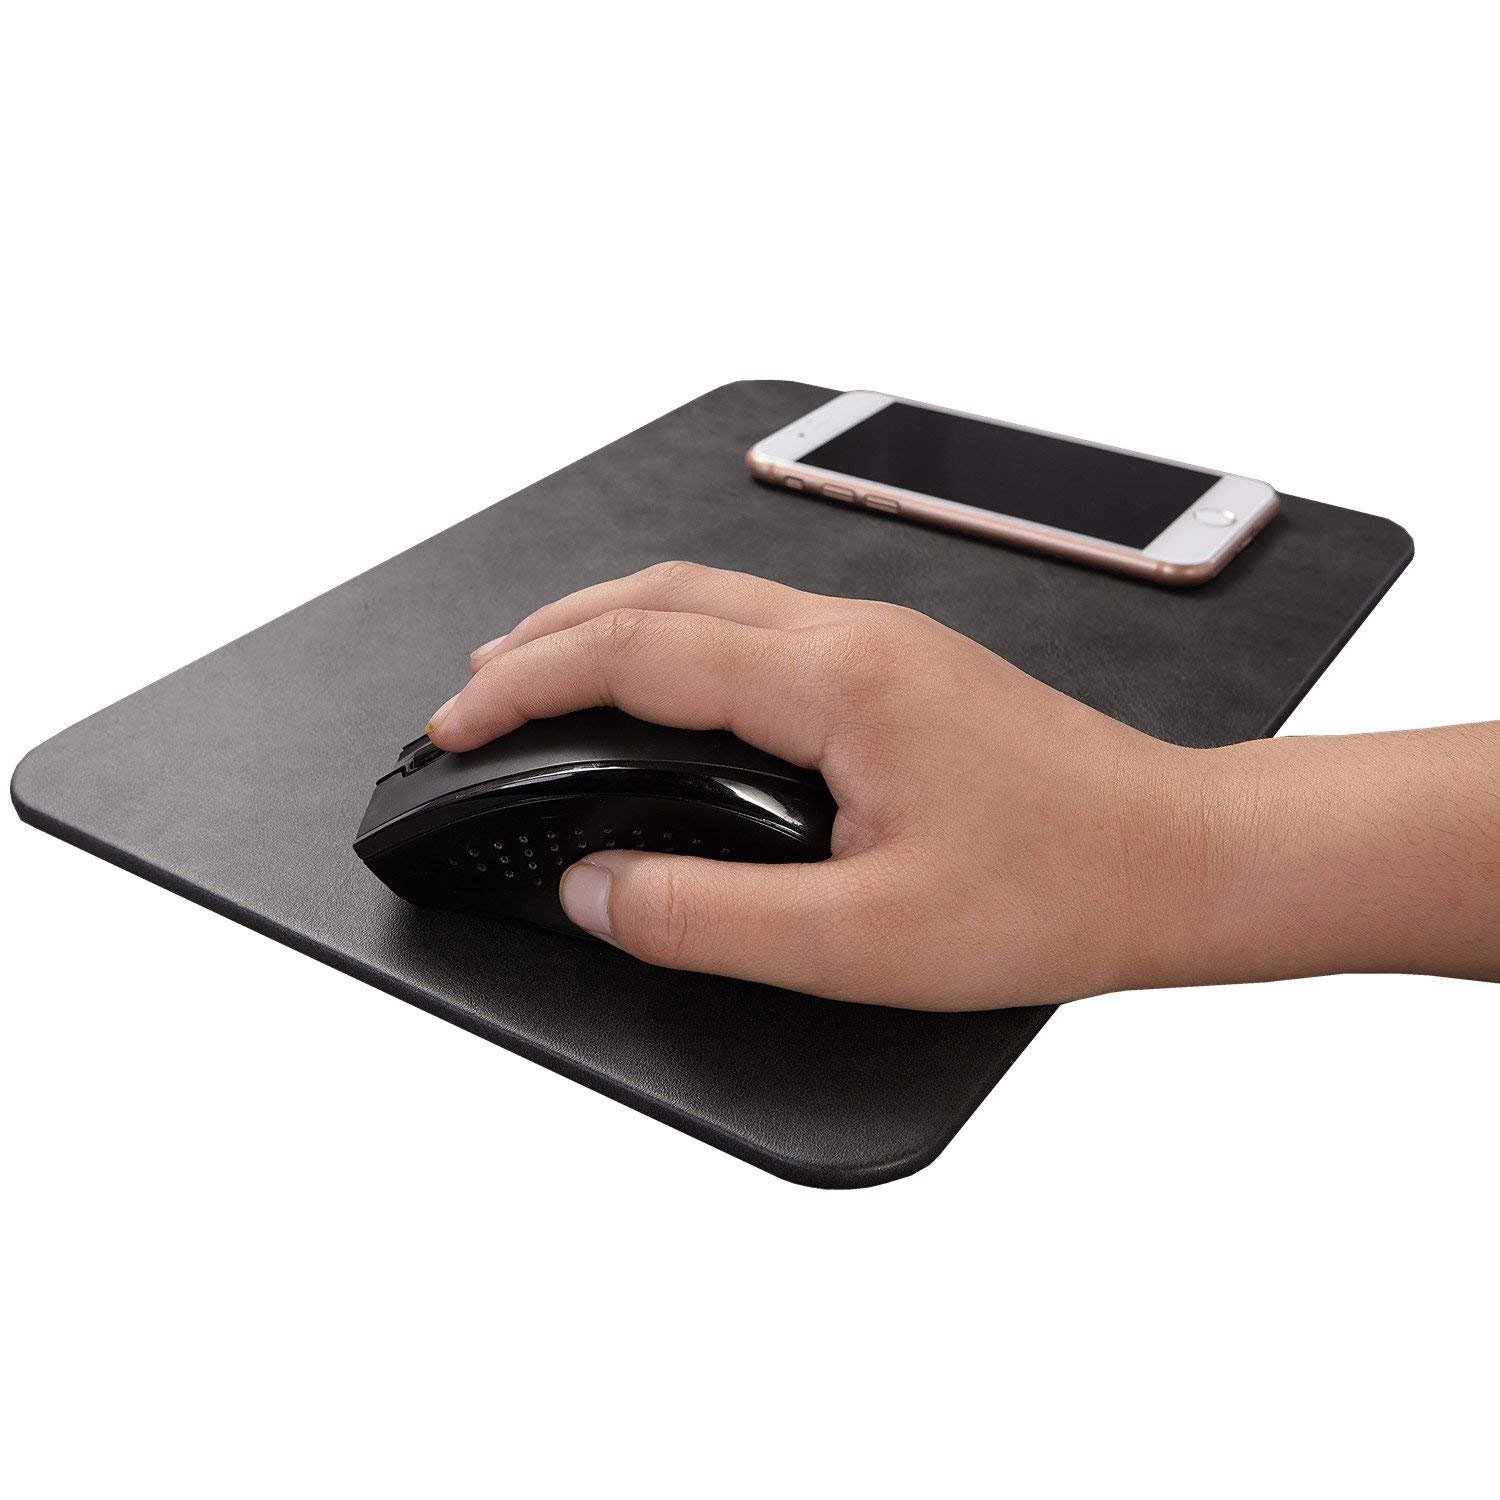 HF-WMC: Mouse pad with Wireless Charger, Qi Certified 10W Fast Wireless Charging Pad